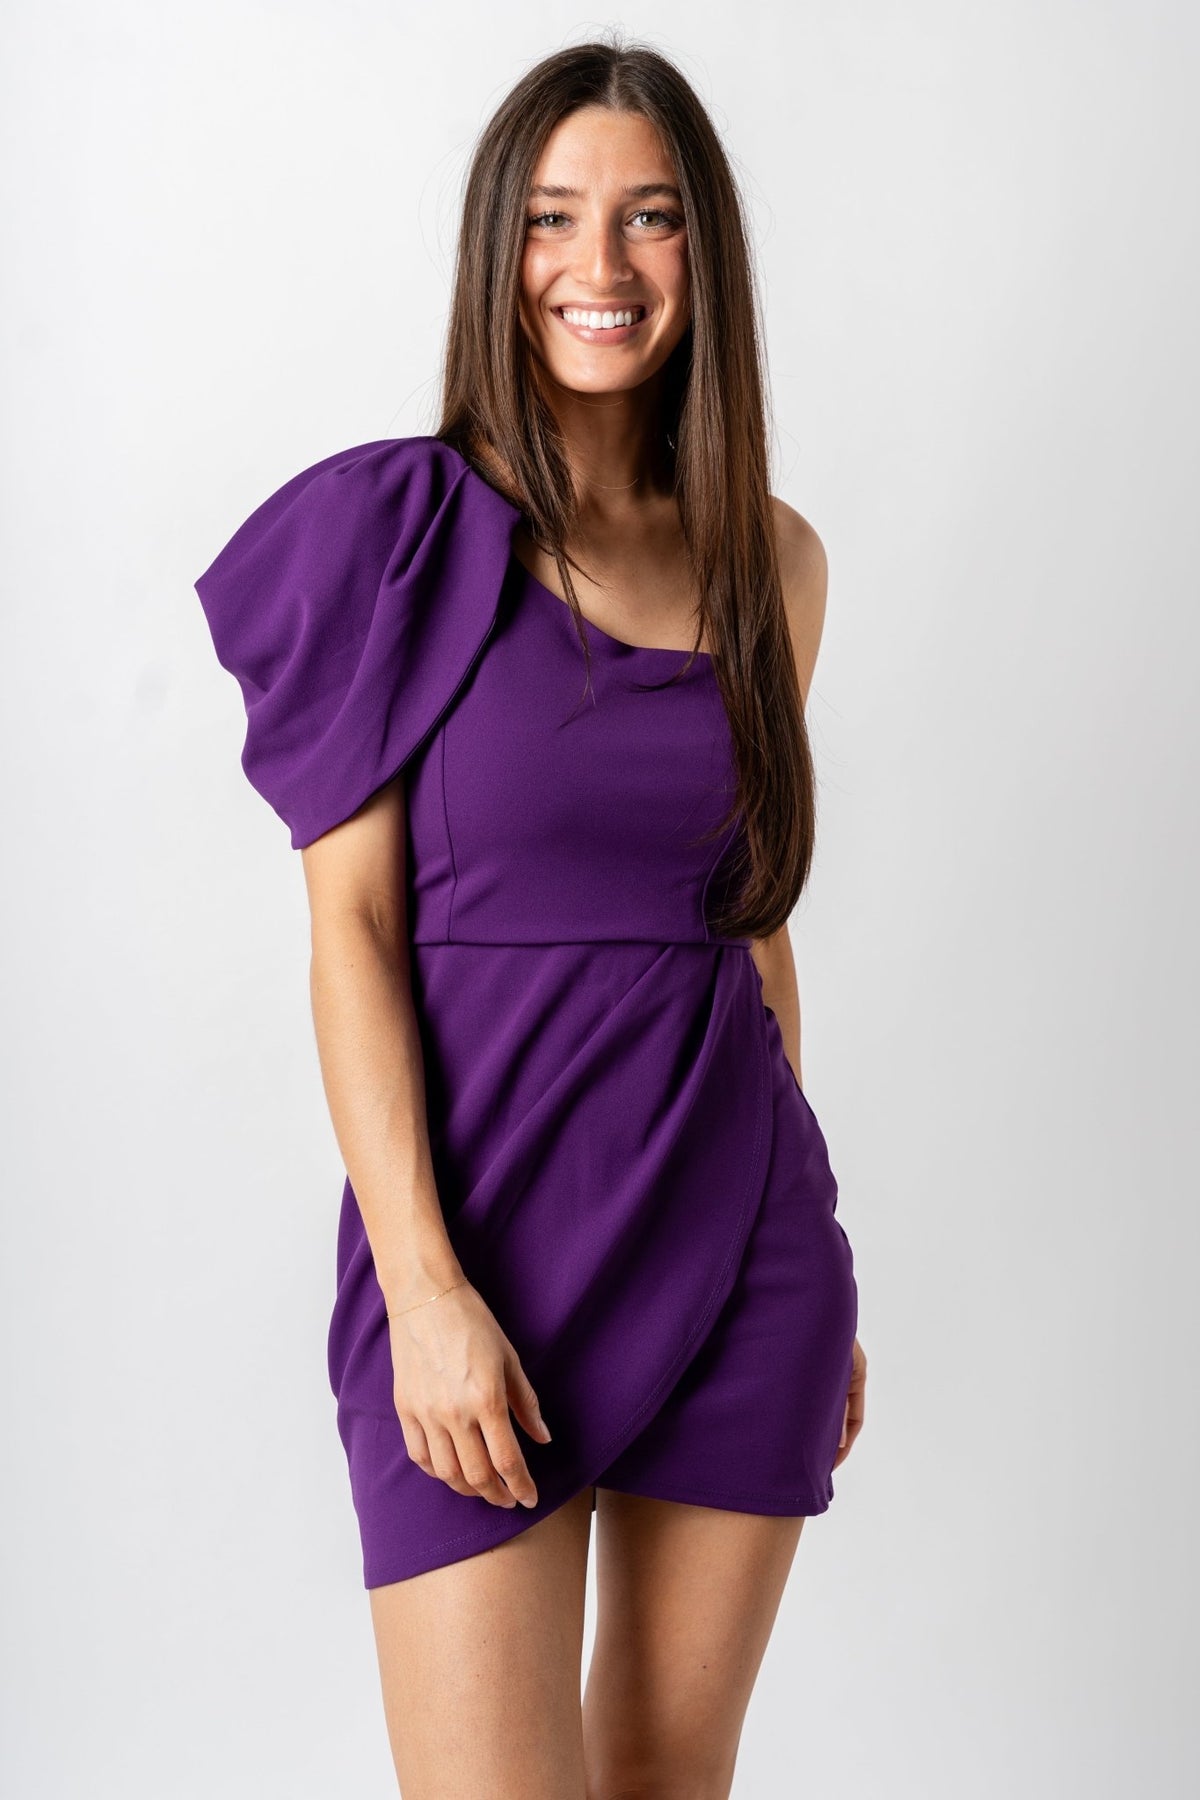 One shoulder mini dress ultra violet - Cute Dresses - Trendy Dresses at Lush Fashion Lounge Boutique in Oklahoma City